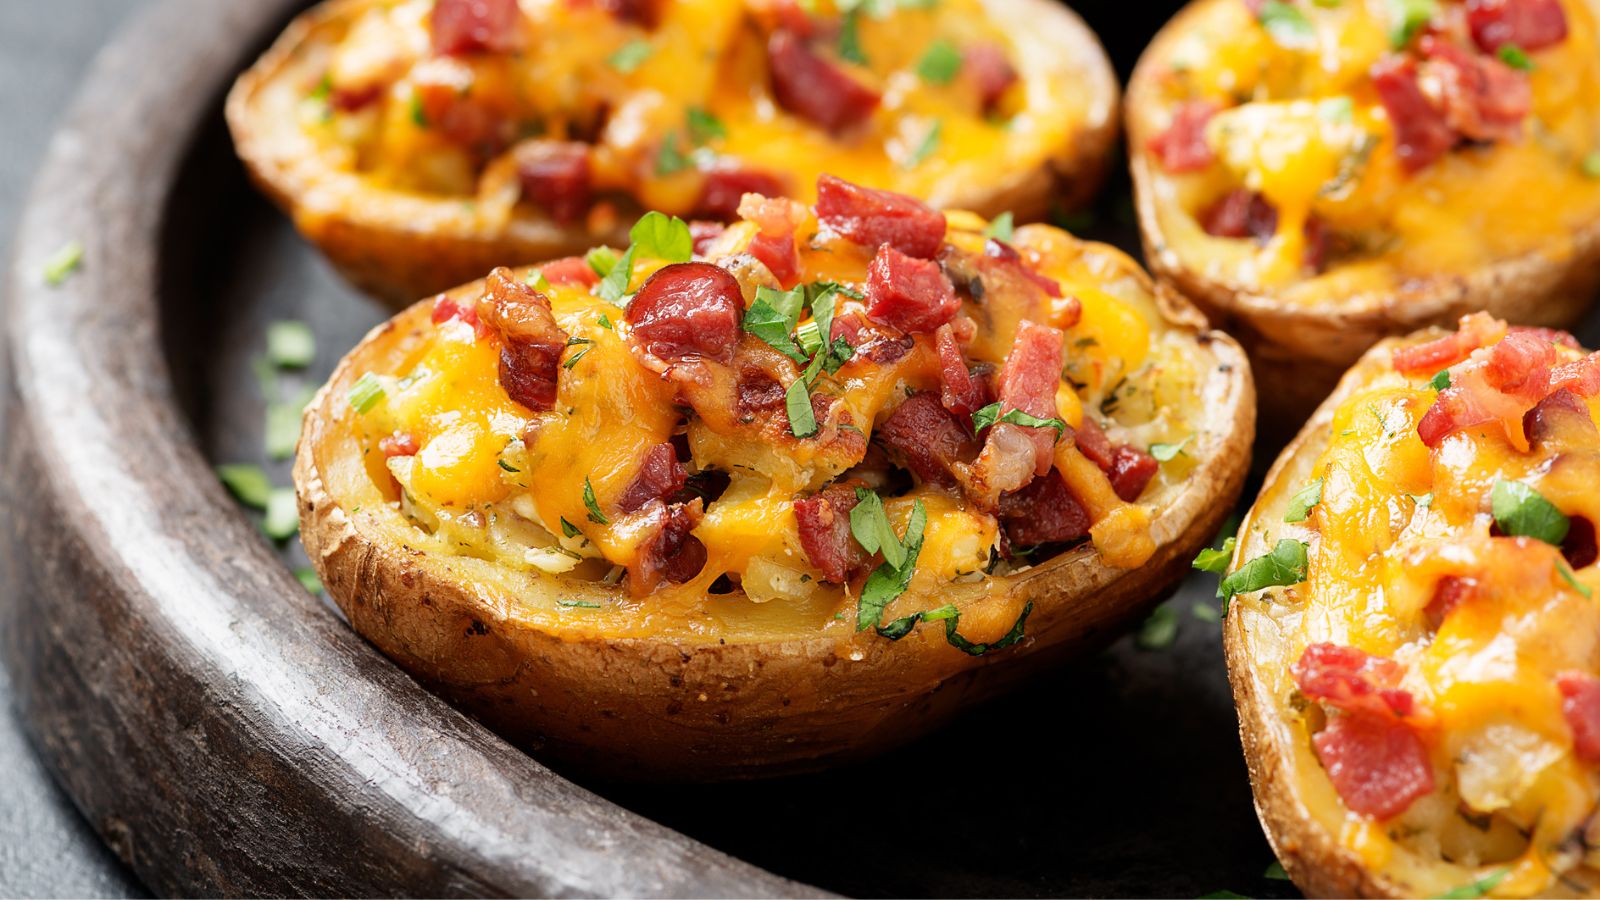 22 Inventive Potato Recipes to Add to Your Meal Rotation